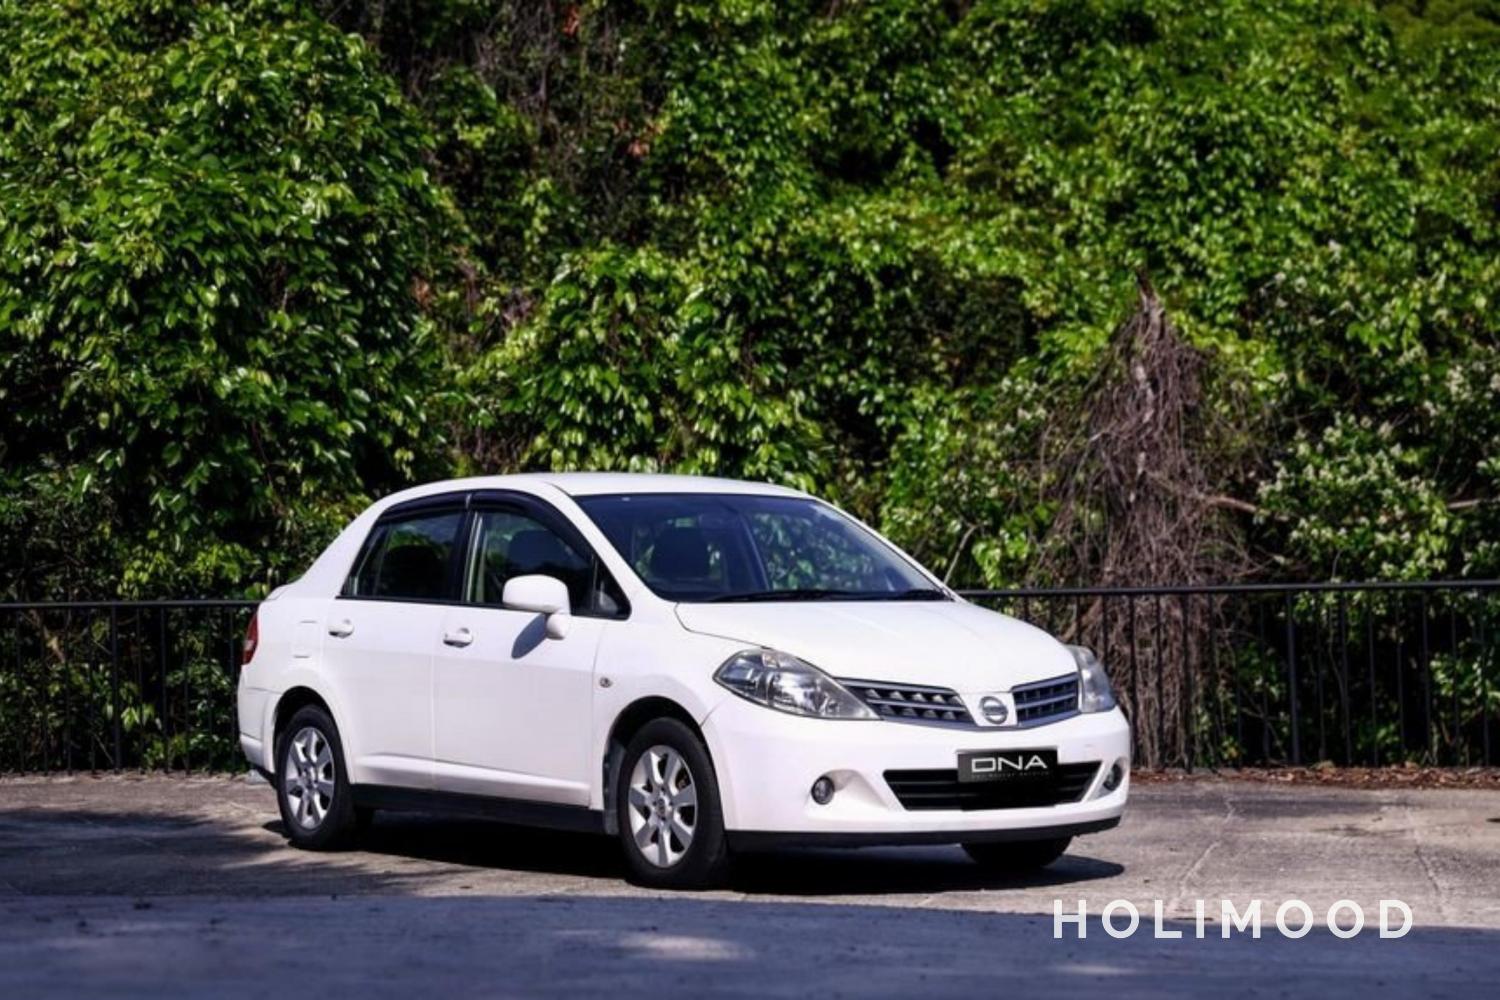 DNA 租車 Nissan Tiida - Practical family car for 5 people（Month Rental） 1